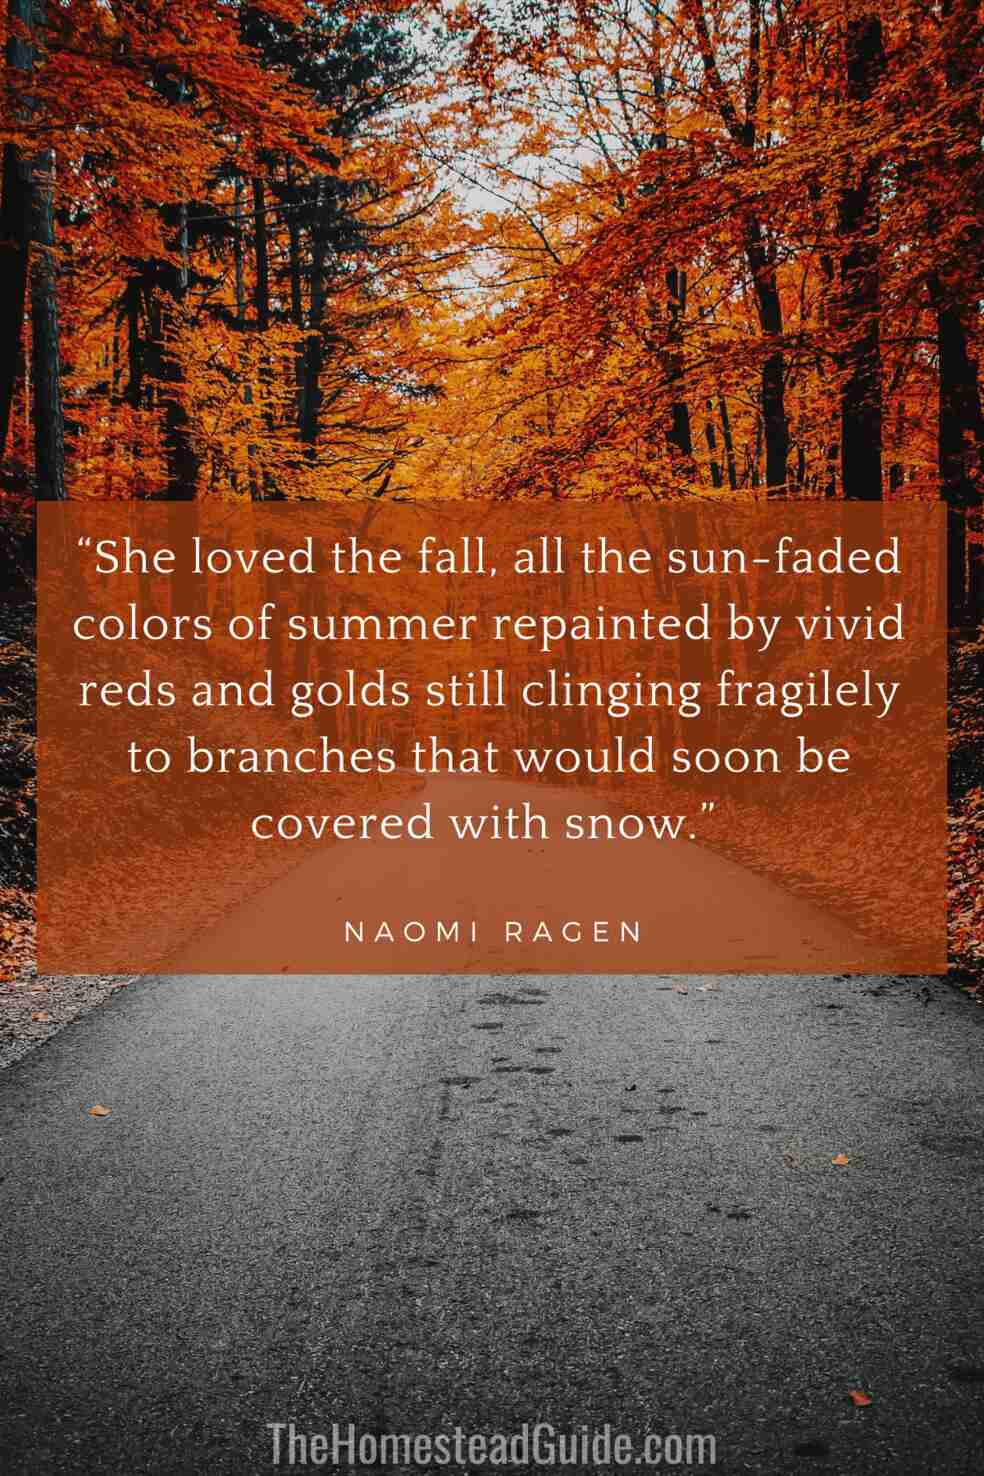 She loved the fall, all the sun-faded colors of summer repainted by vivid reds and golds still clinging fragilely to branches that would soon be covered with snow.